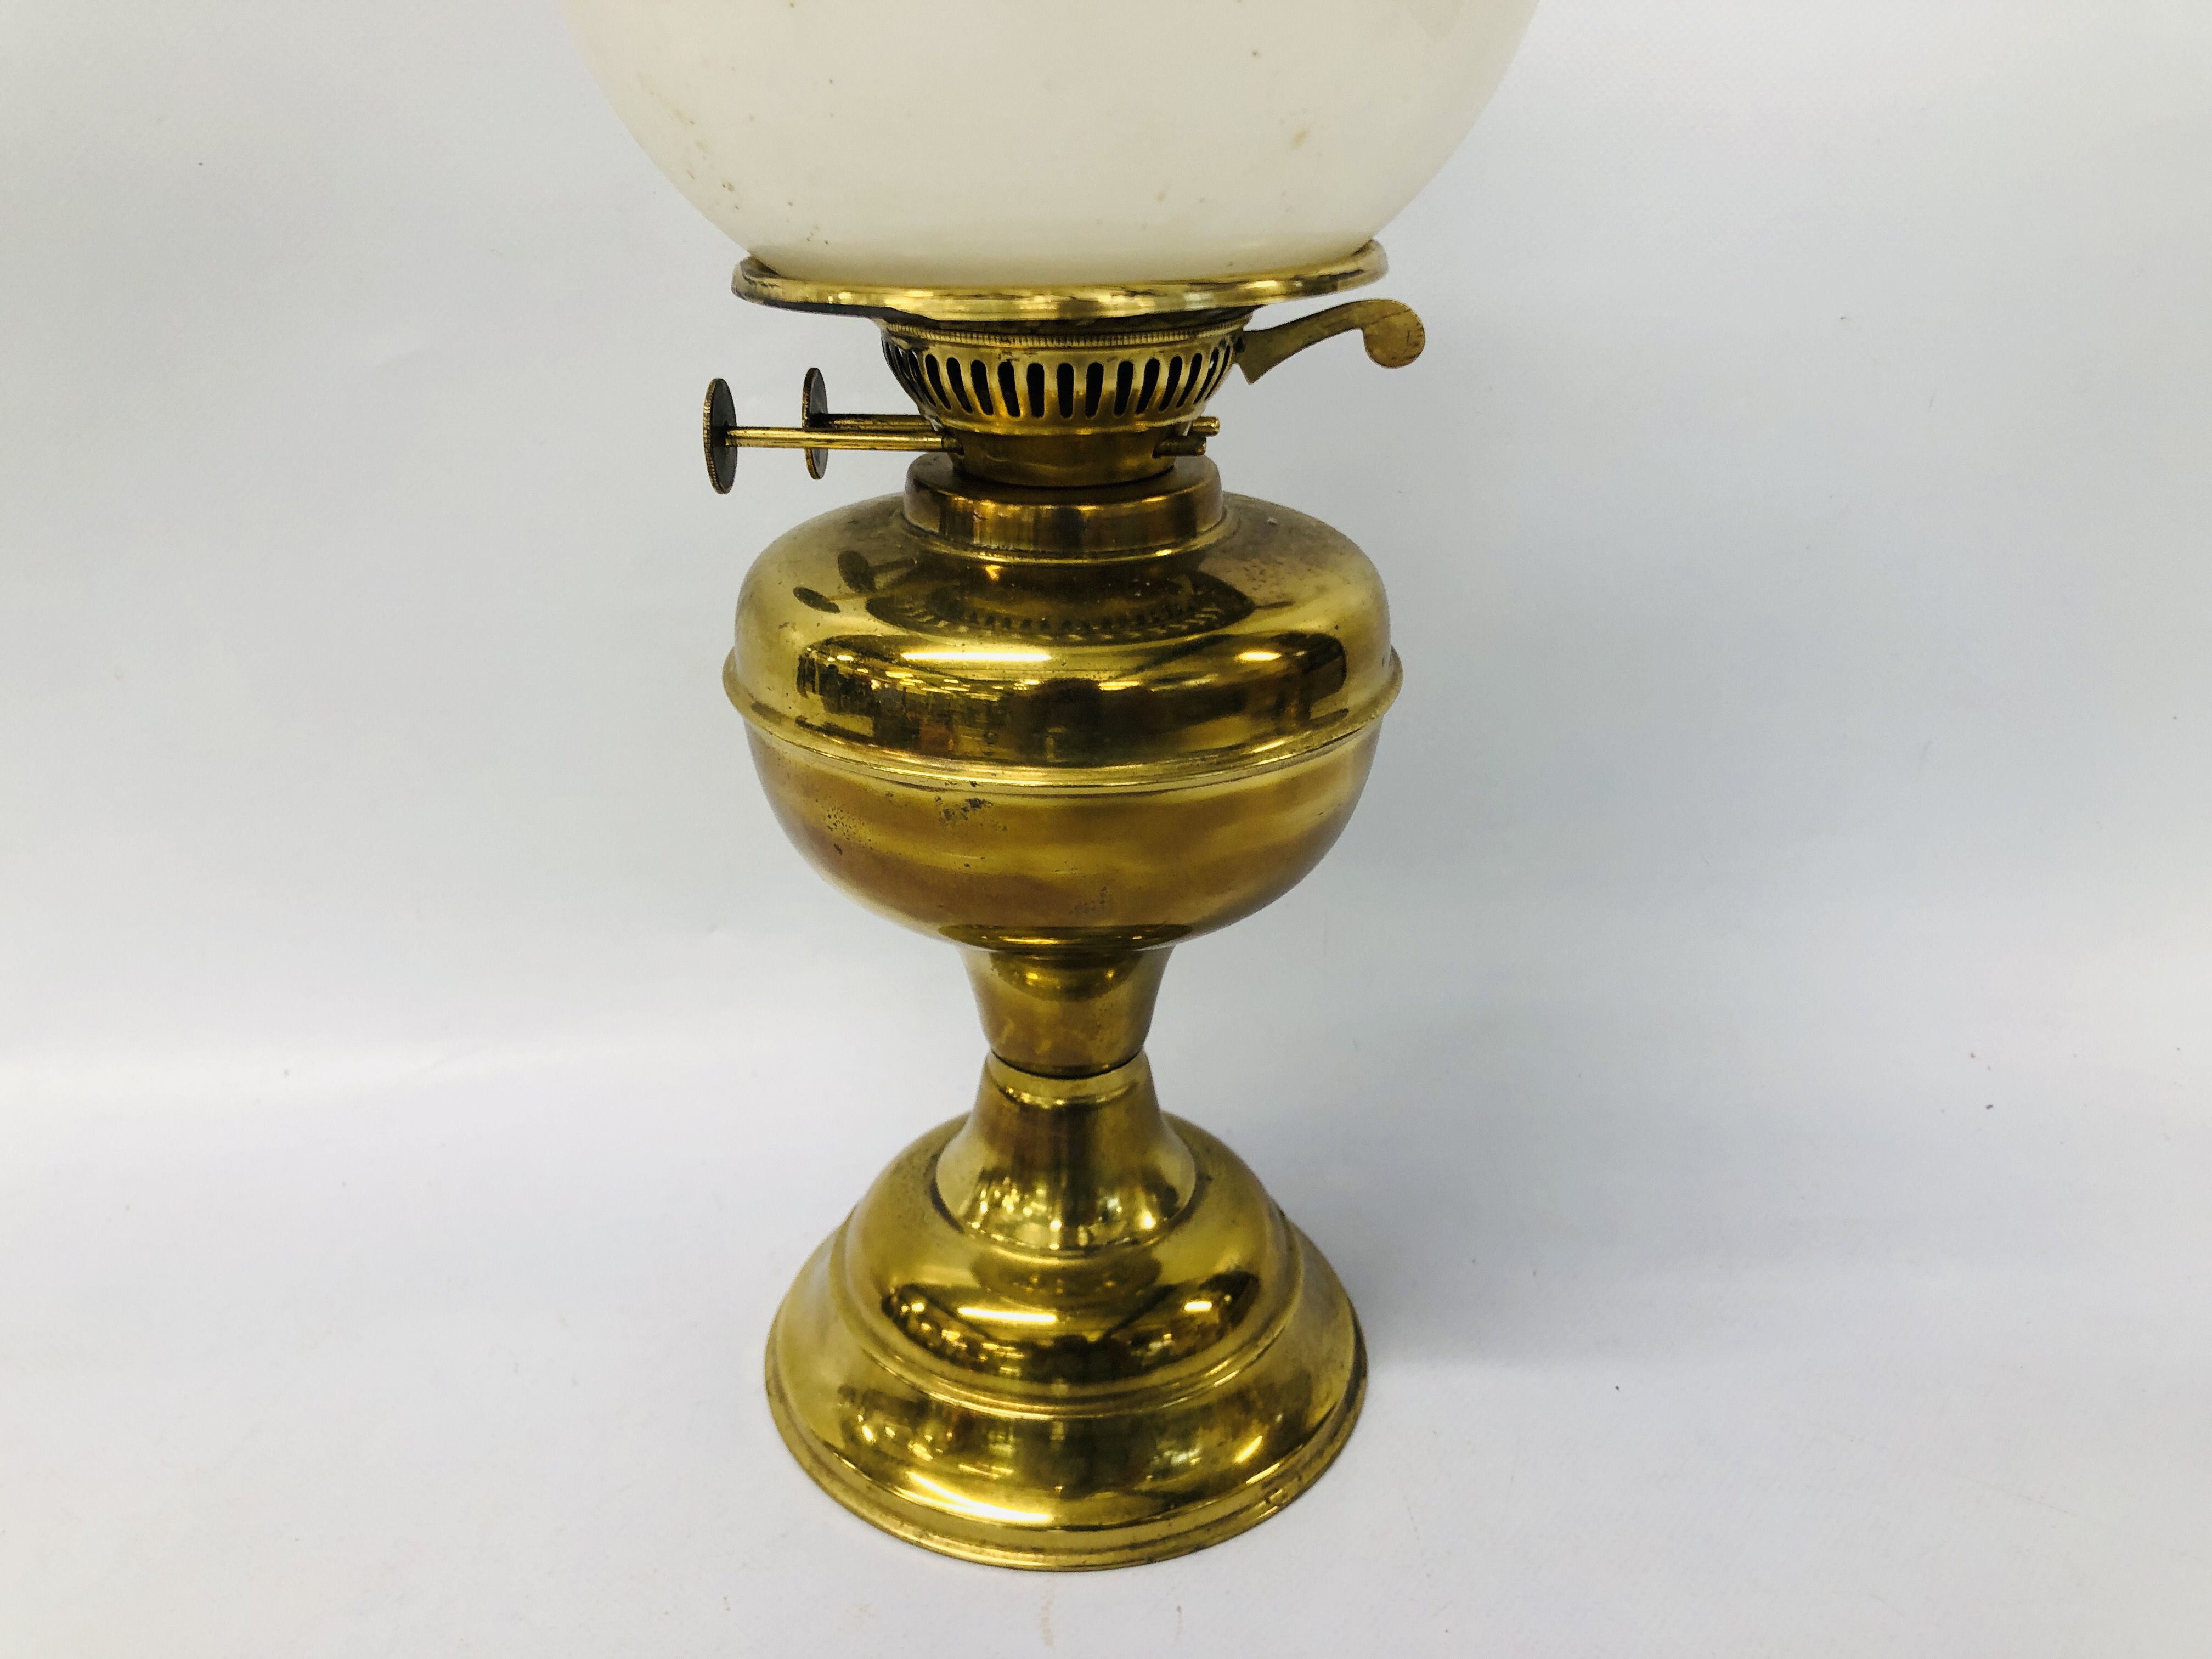 MIXED BRASS AND COPPER TO INCLUDE OIL LAMPS, LAMPS, STOVE, TRIVET, WATERING CAN, SCALES, CUPS, - Image 22 of 27